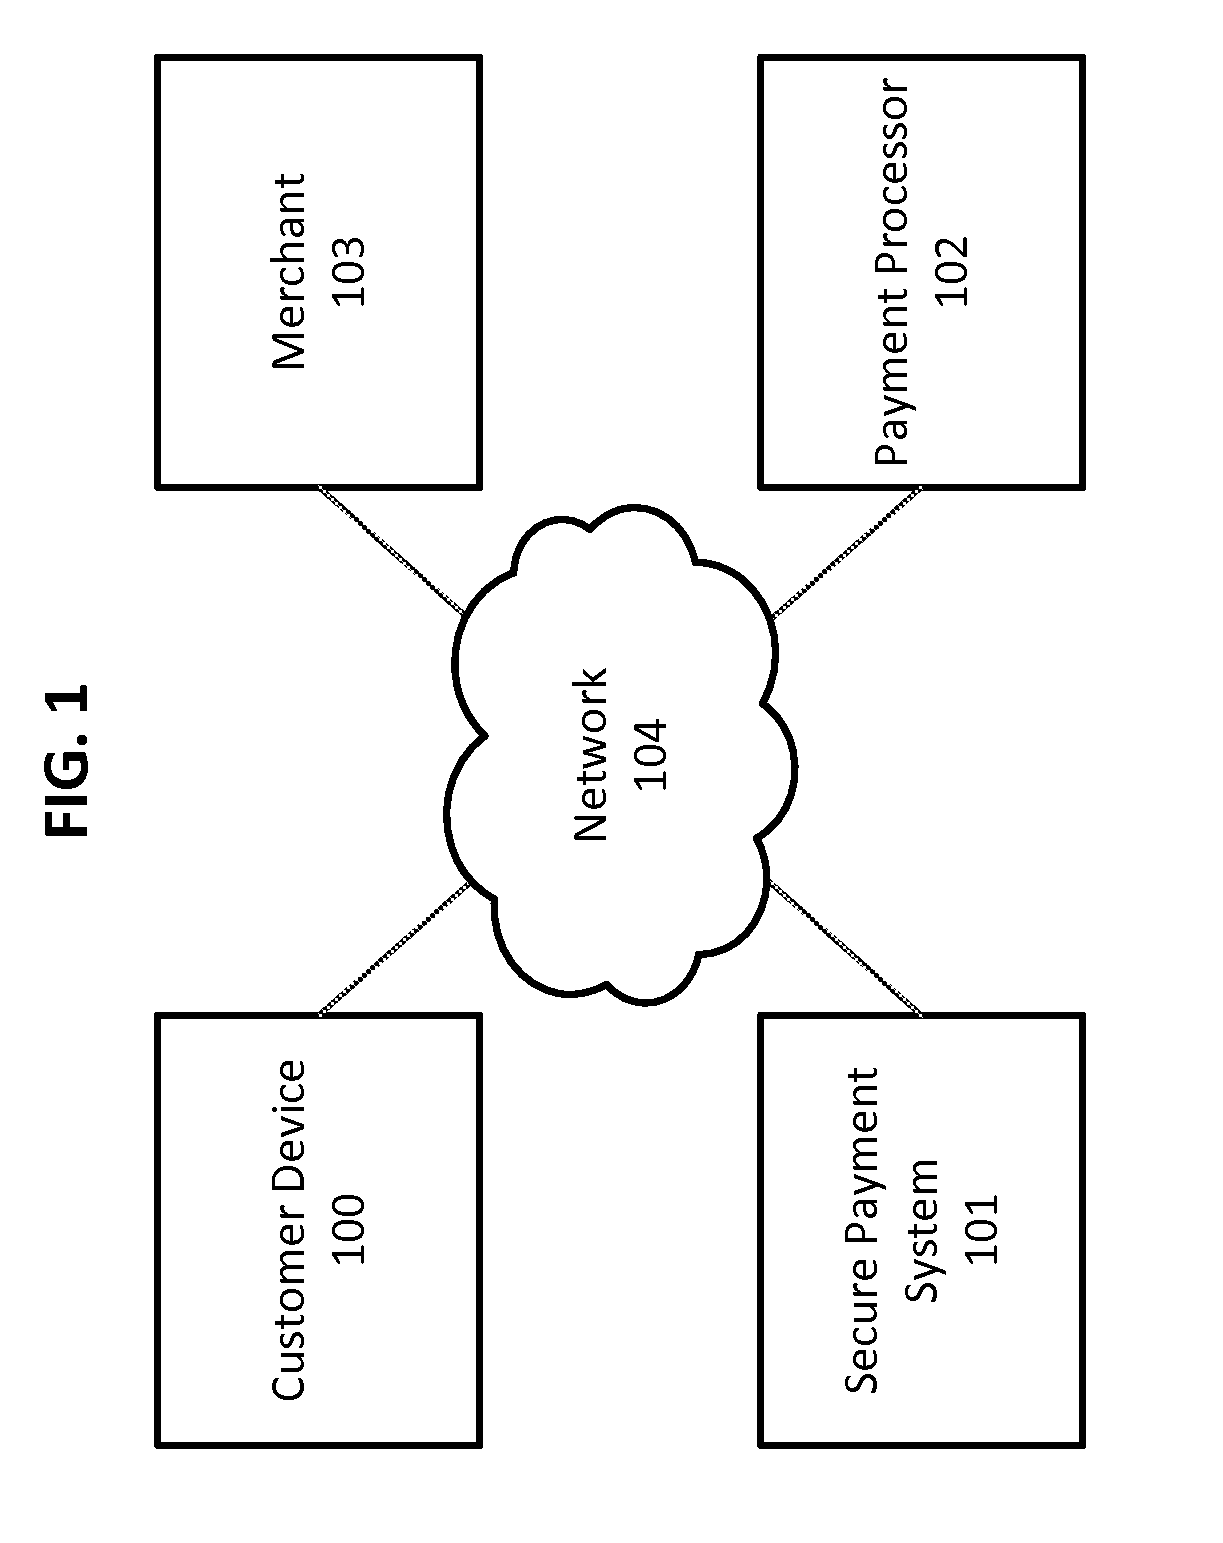 Securely Storing and Using Sensitive Information for Making Payments Using a Wallet Application